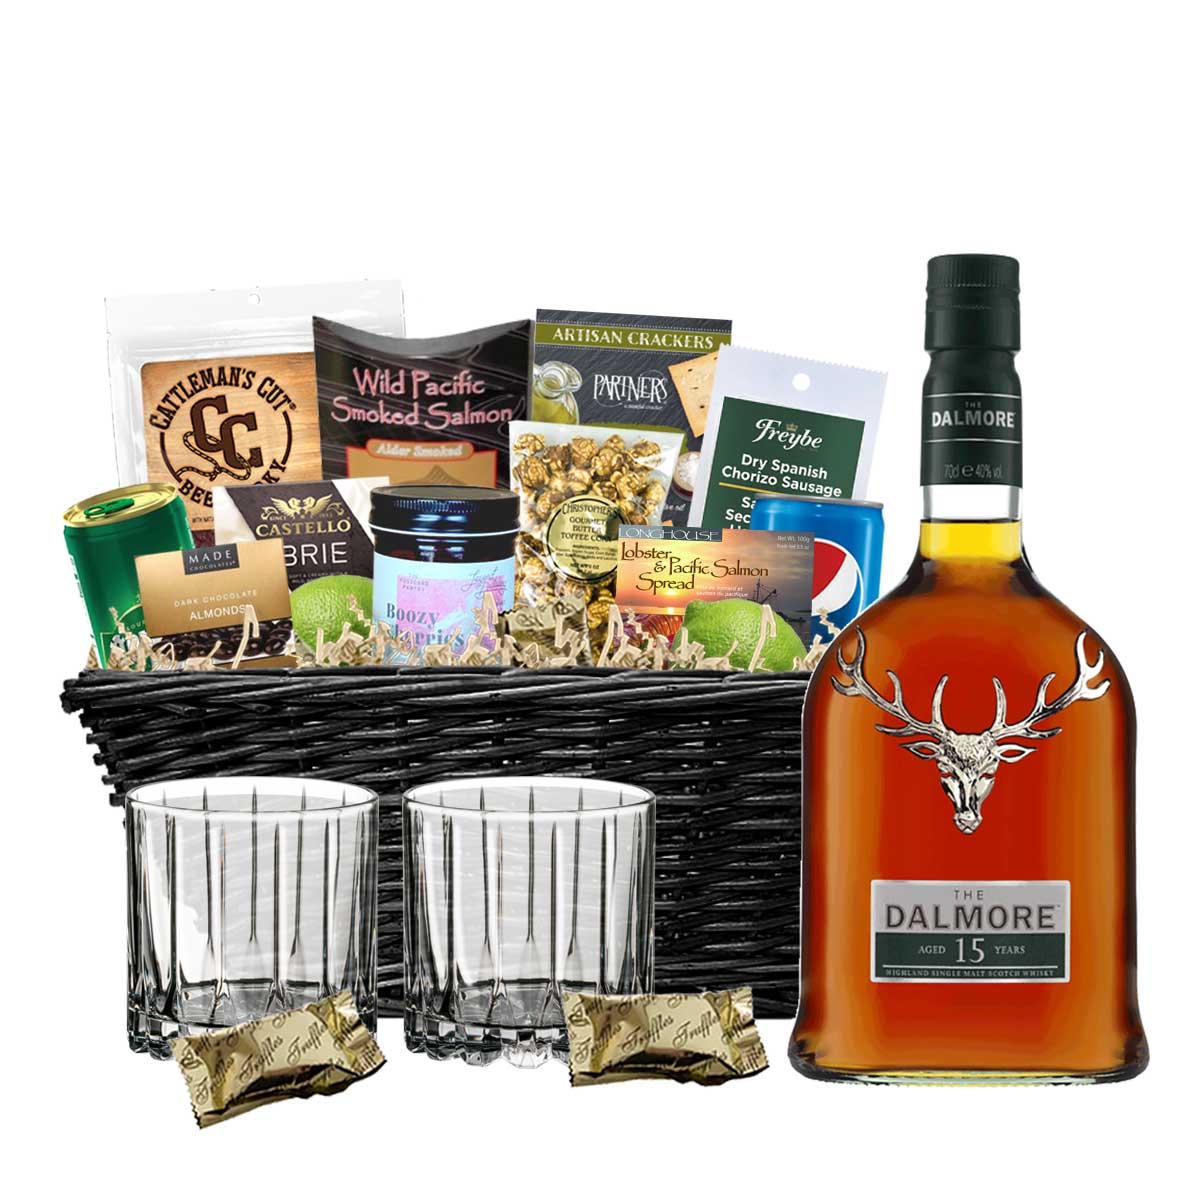 TAG Liquor Stores BC - Dalmore 15 Year Old Scotch Whisky 750ml Gift Basket